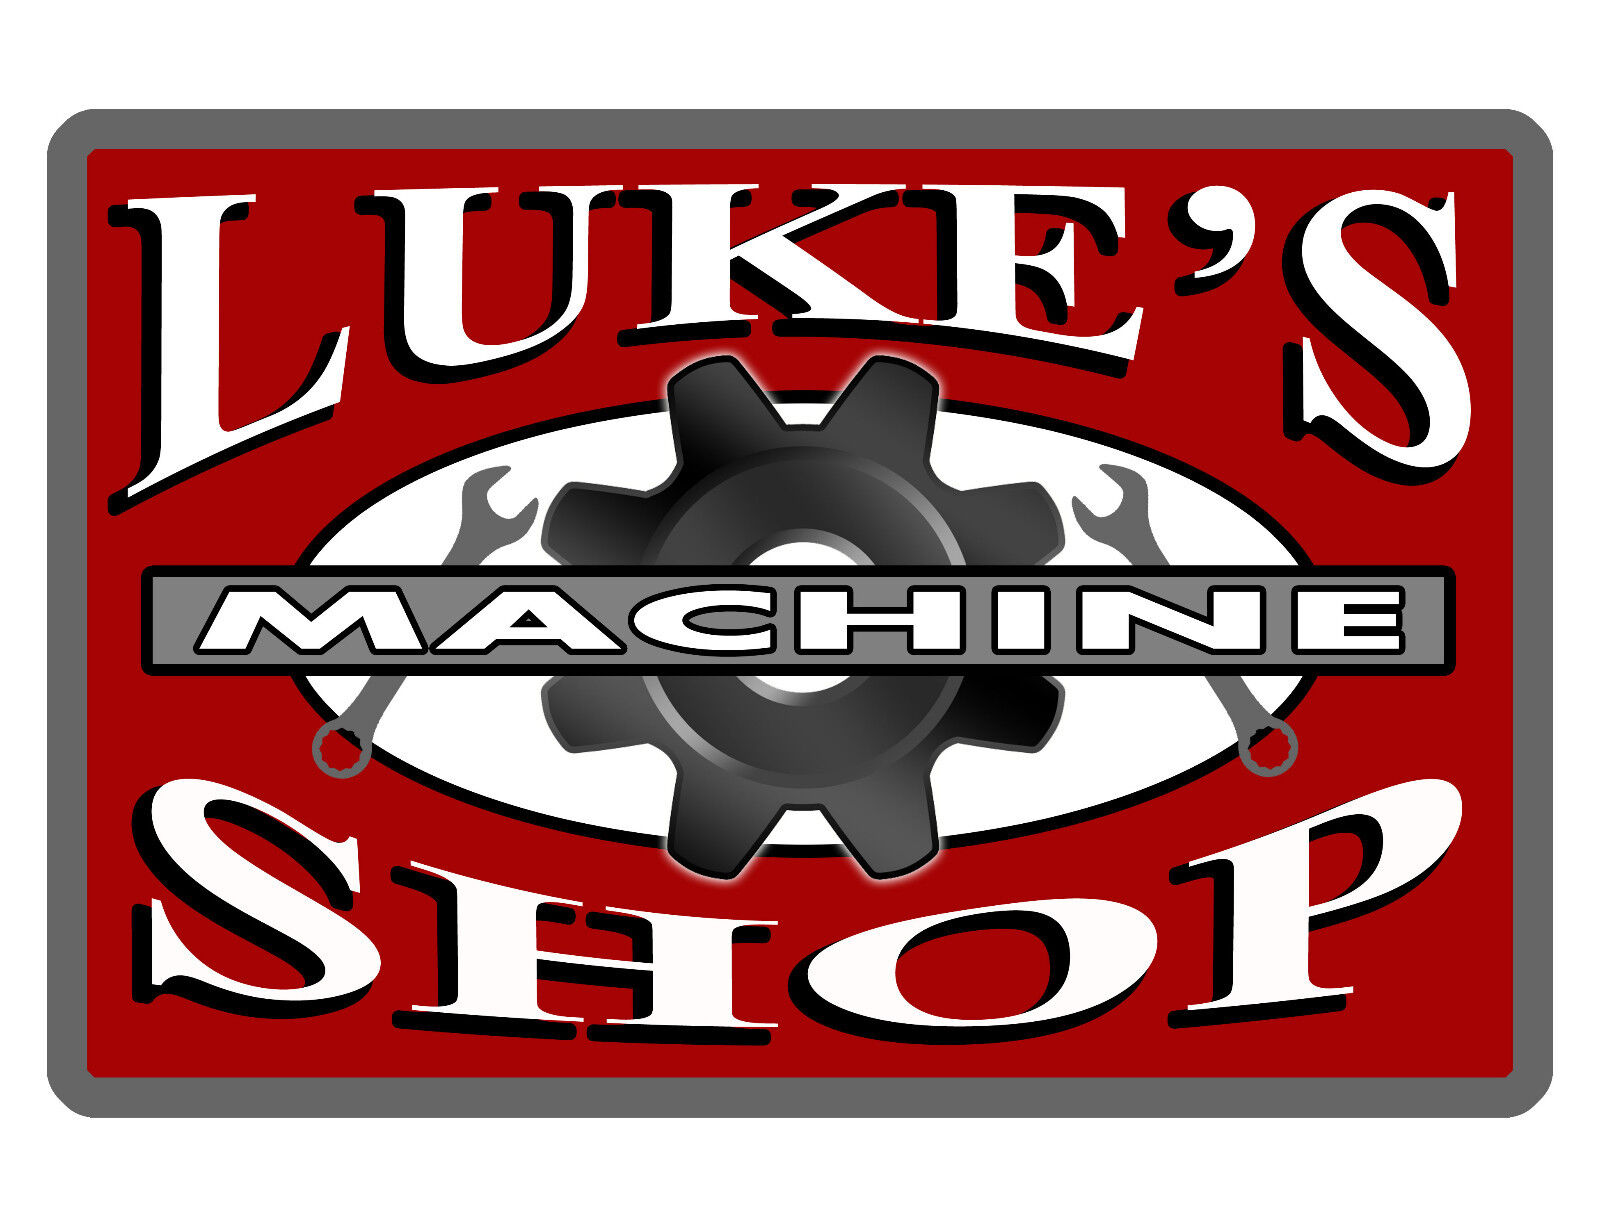 Personalized Garage/ MACHINE SHOP Sign Printed w YOUR NAME Aluminum Sign RED 394